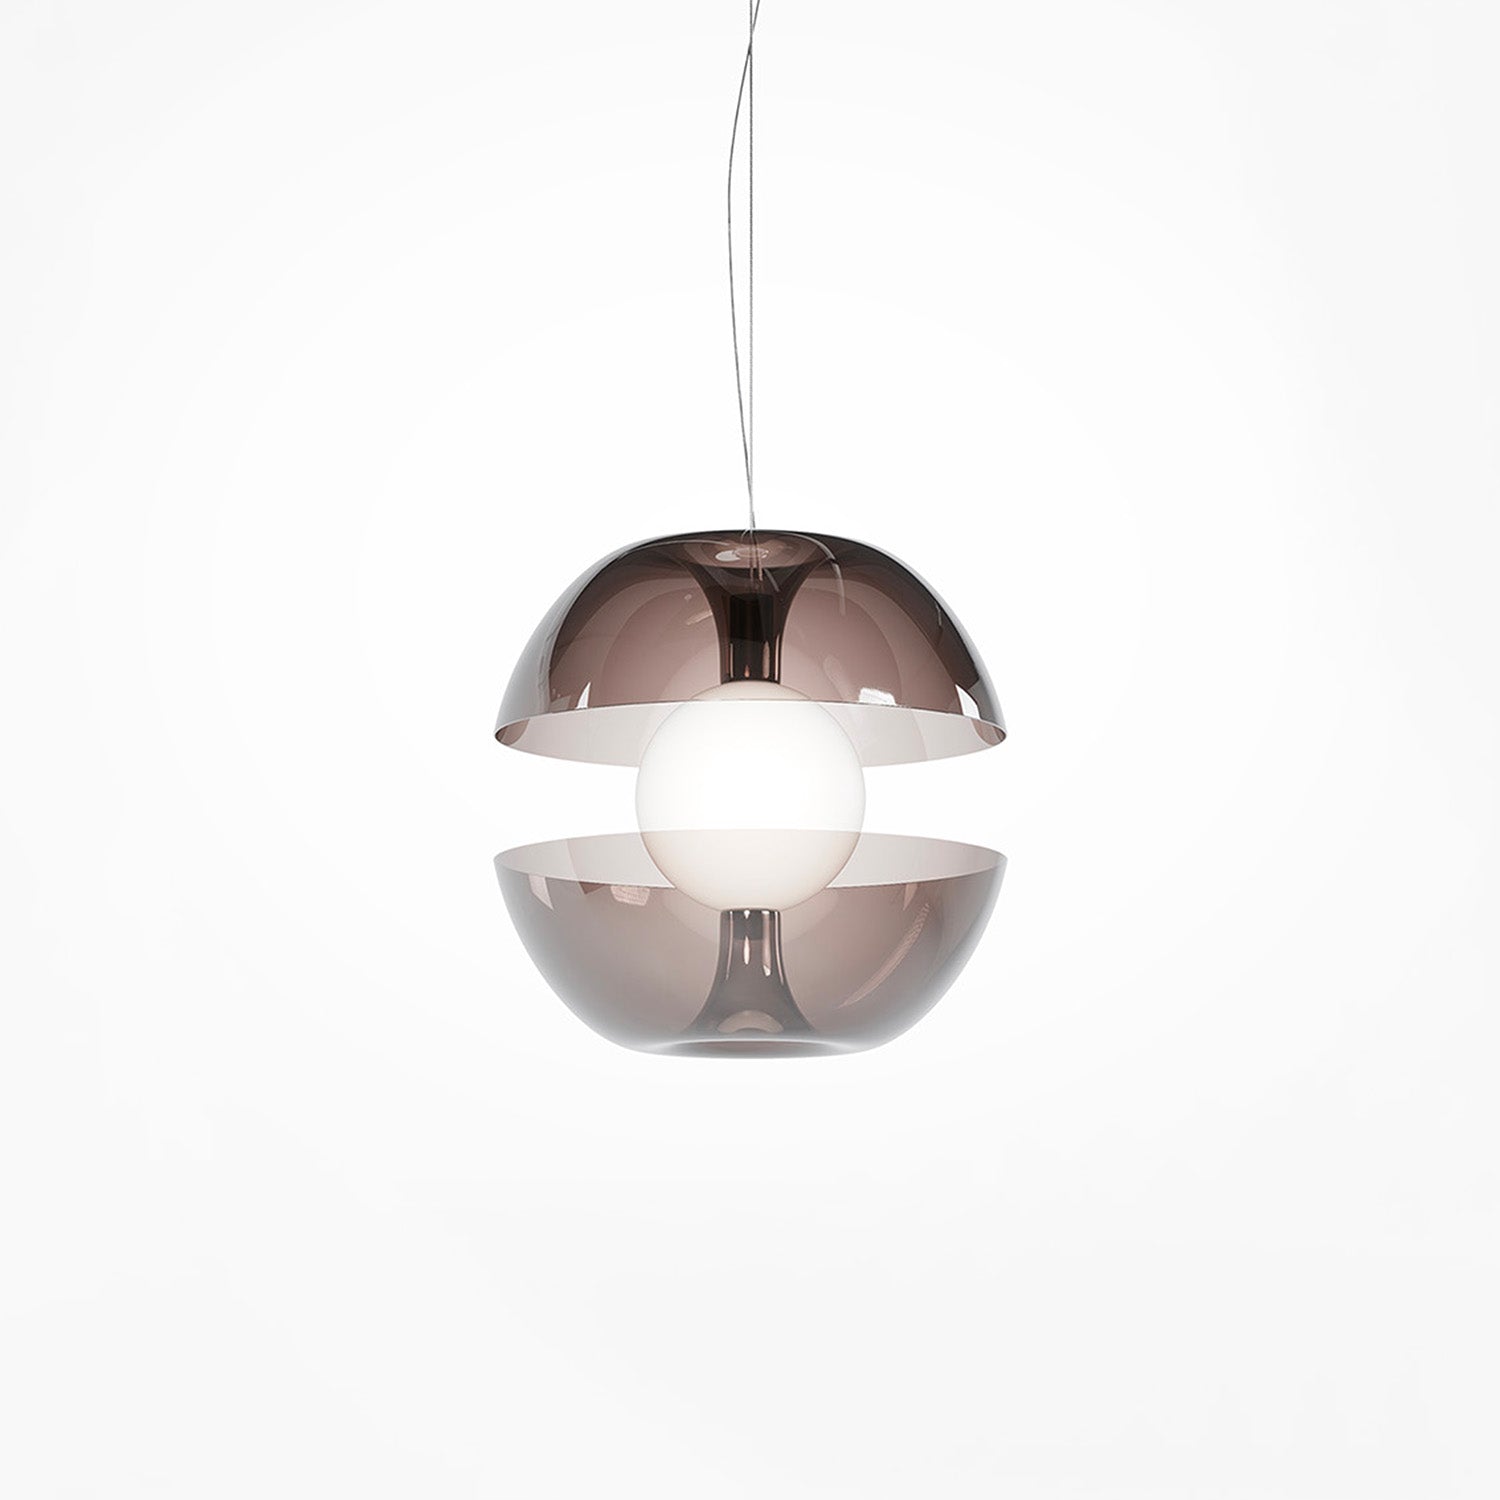 REBEL - Designer pendant lamp in the shape of an apple, smoked glass Integrated LED